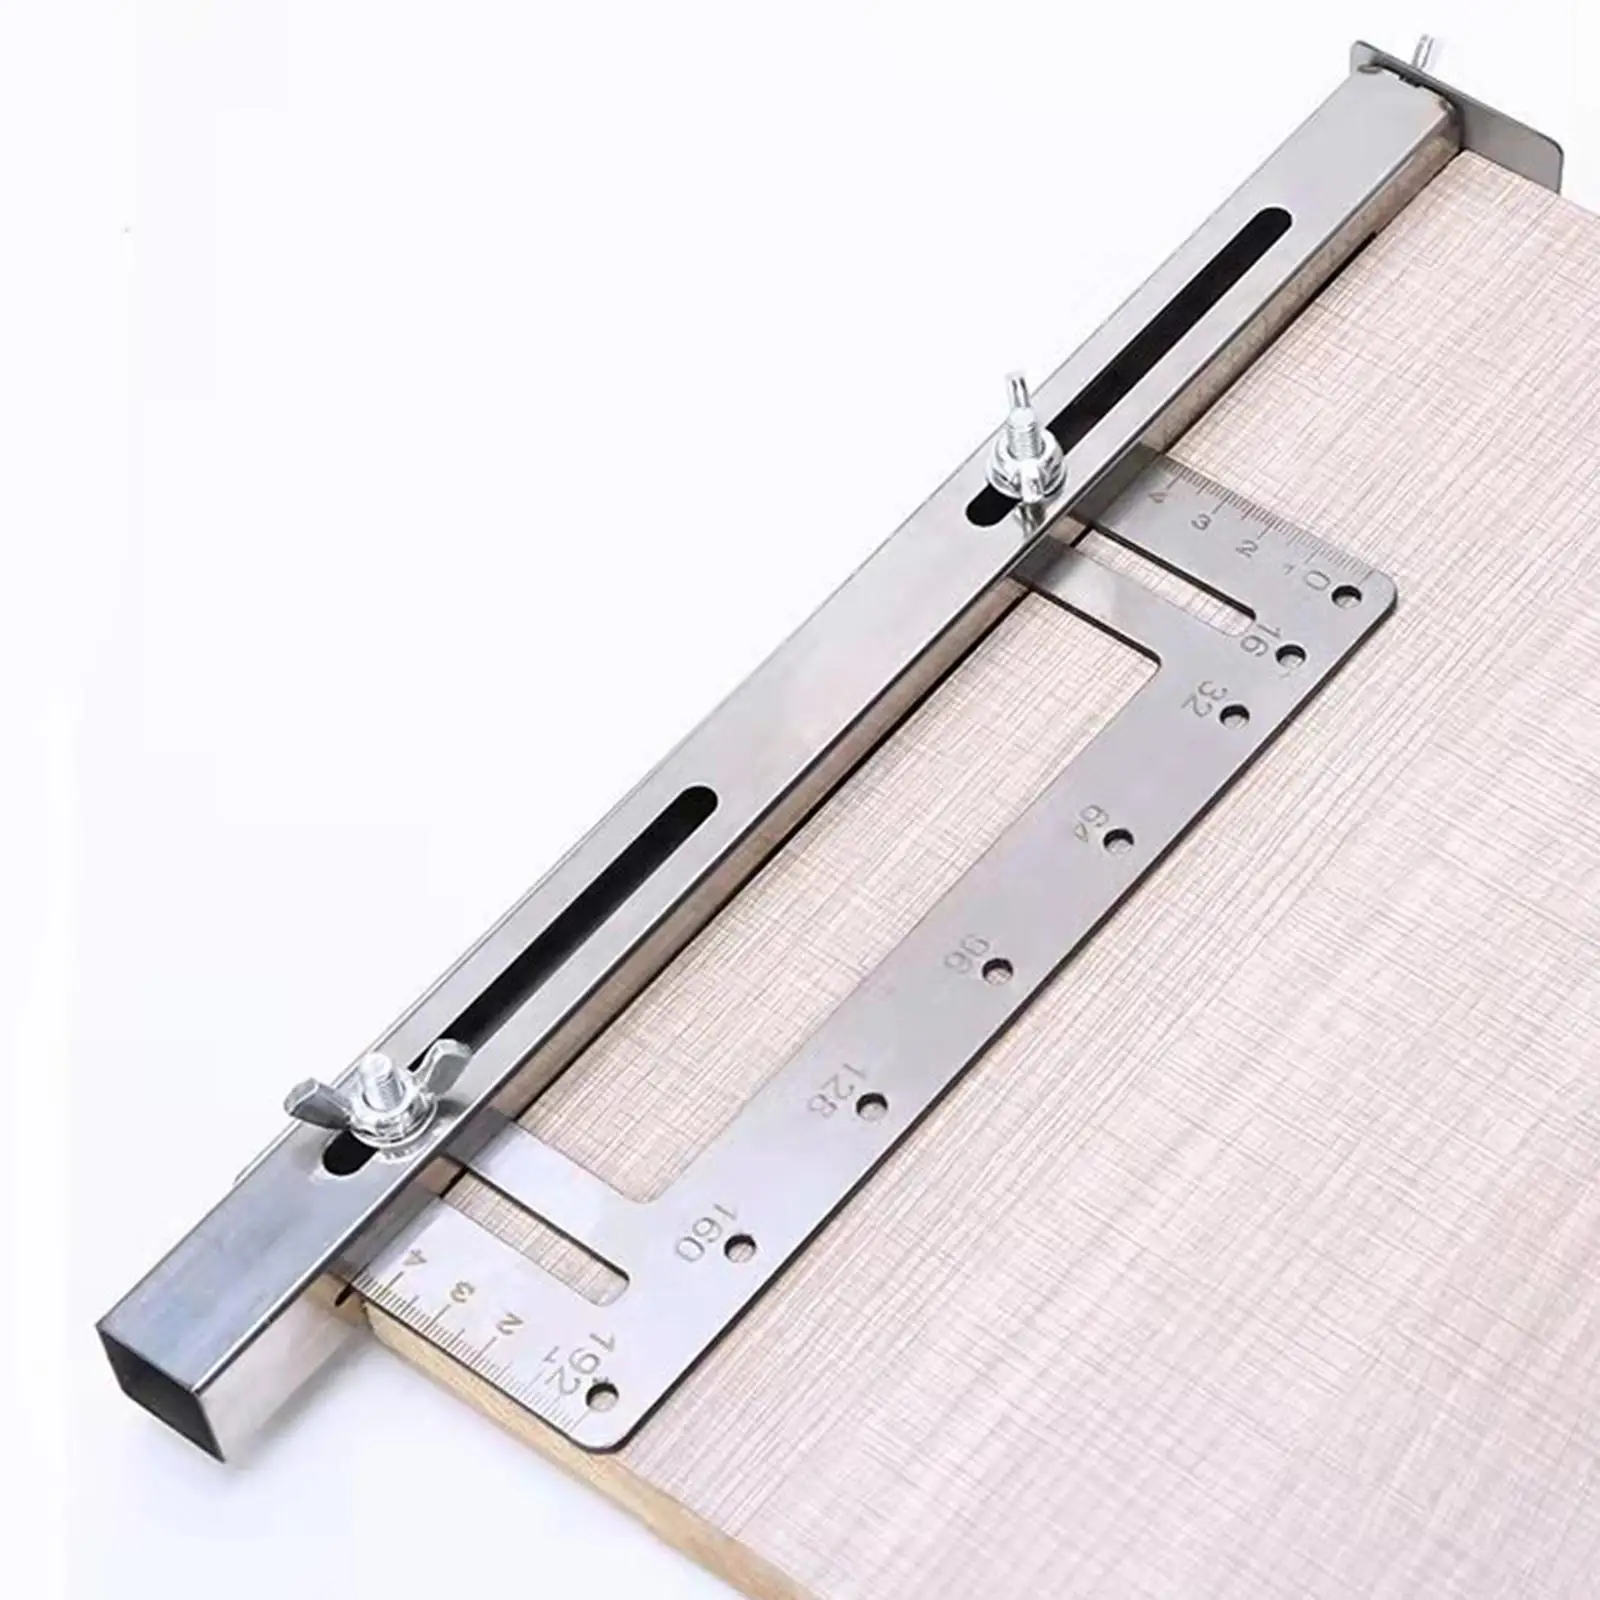 Stainless Steel Hole Punch Locator, Cabinet Drawer Handle Hole Drill Guide